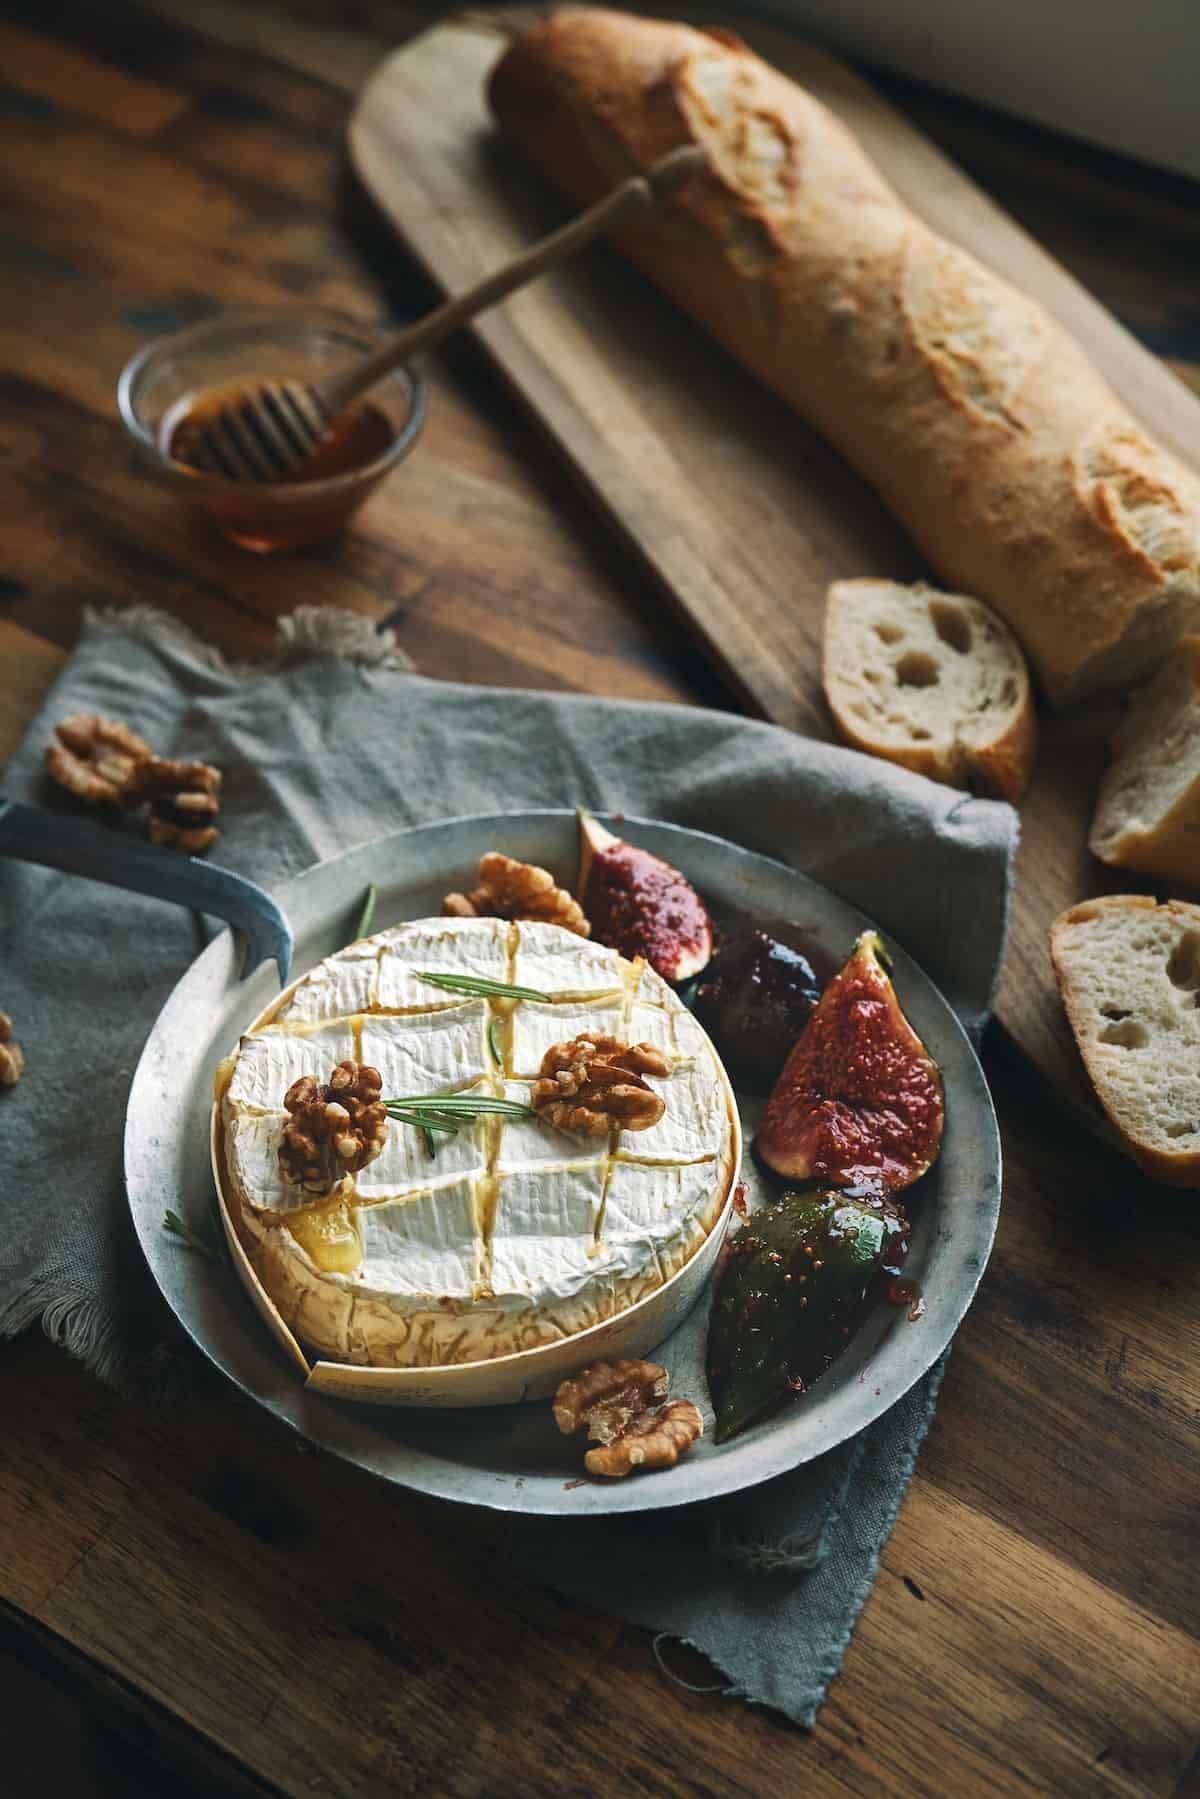 Baked camembert cheese with bread, walnuts and figs